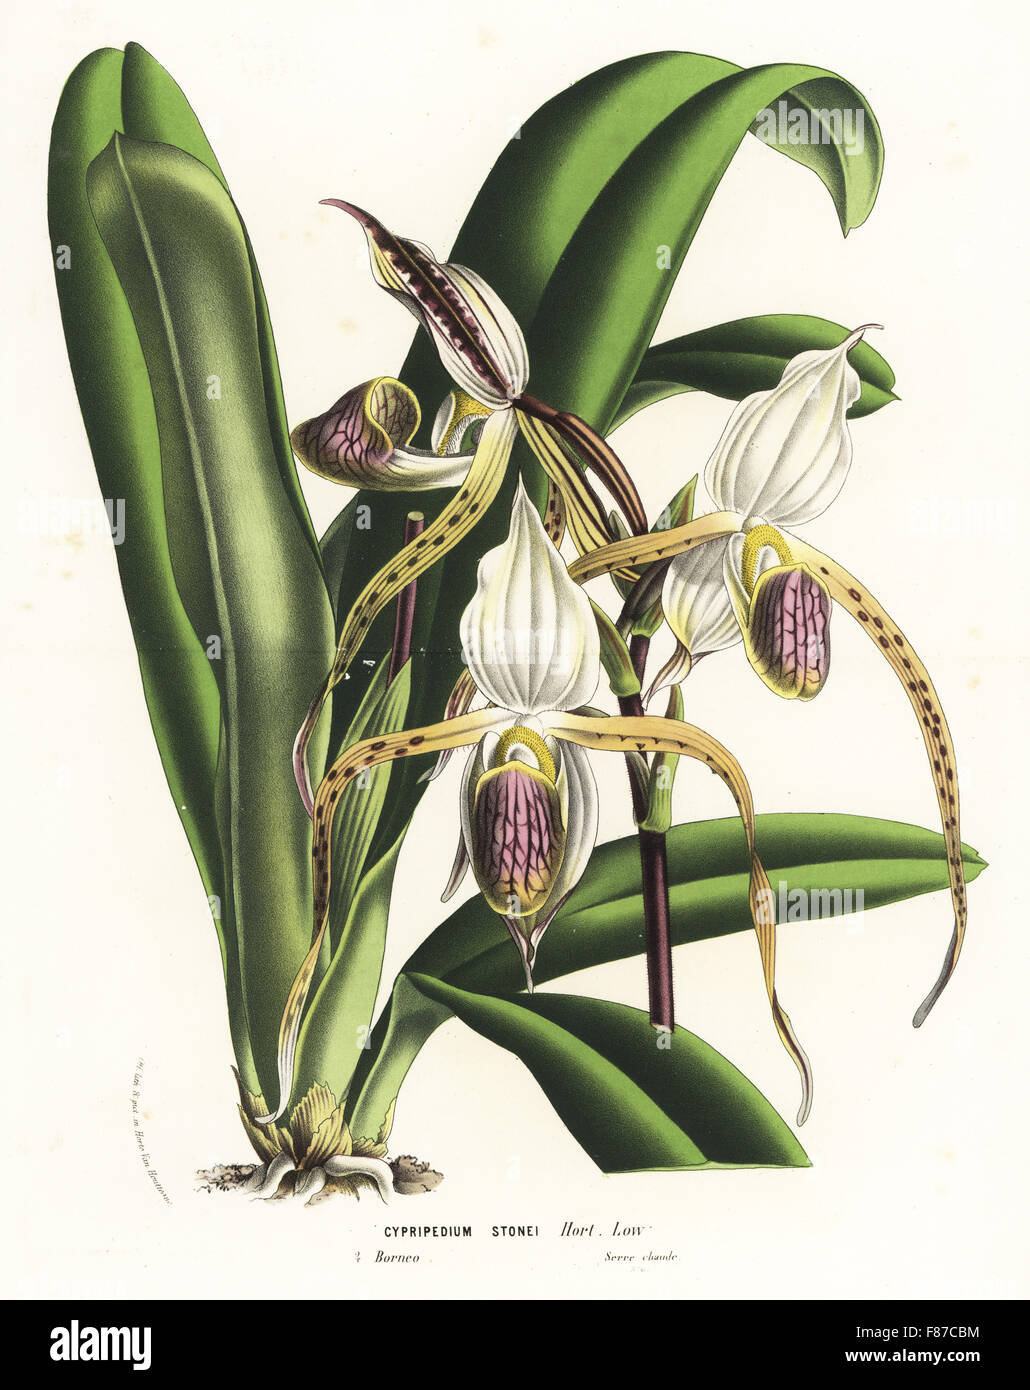 Paphiopedilum stonei orchid (Cypripedium stonei). Handcoloured lithograph from Louis van Houtte and Charles Lemaire's Flowers of the Gardens and Hothouses of Europe, Flore des Serres et des Jardins de l'Europe, Ghent, Belgium, 1867-1868. Stock Photo